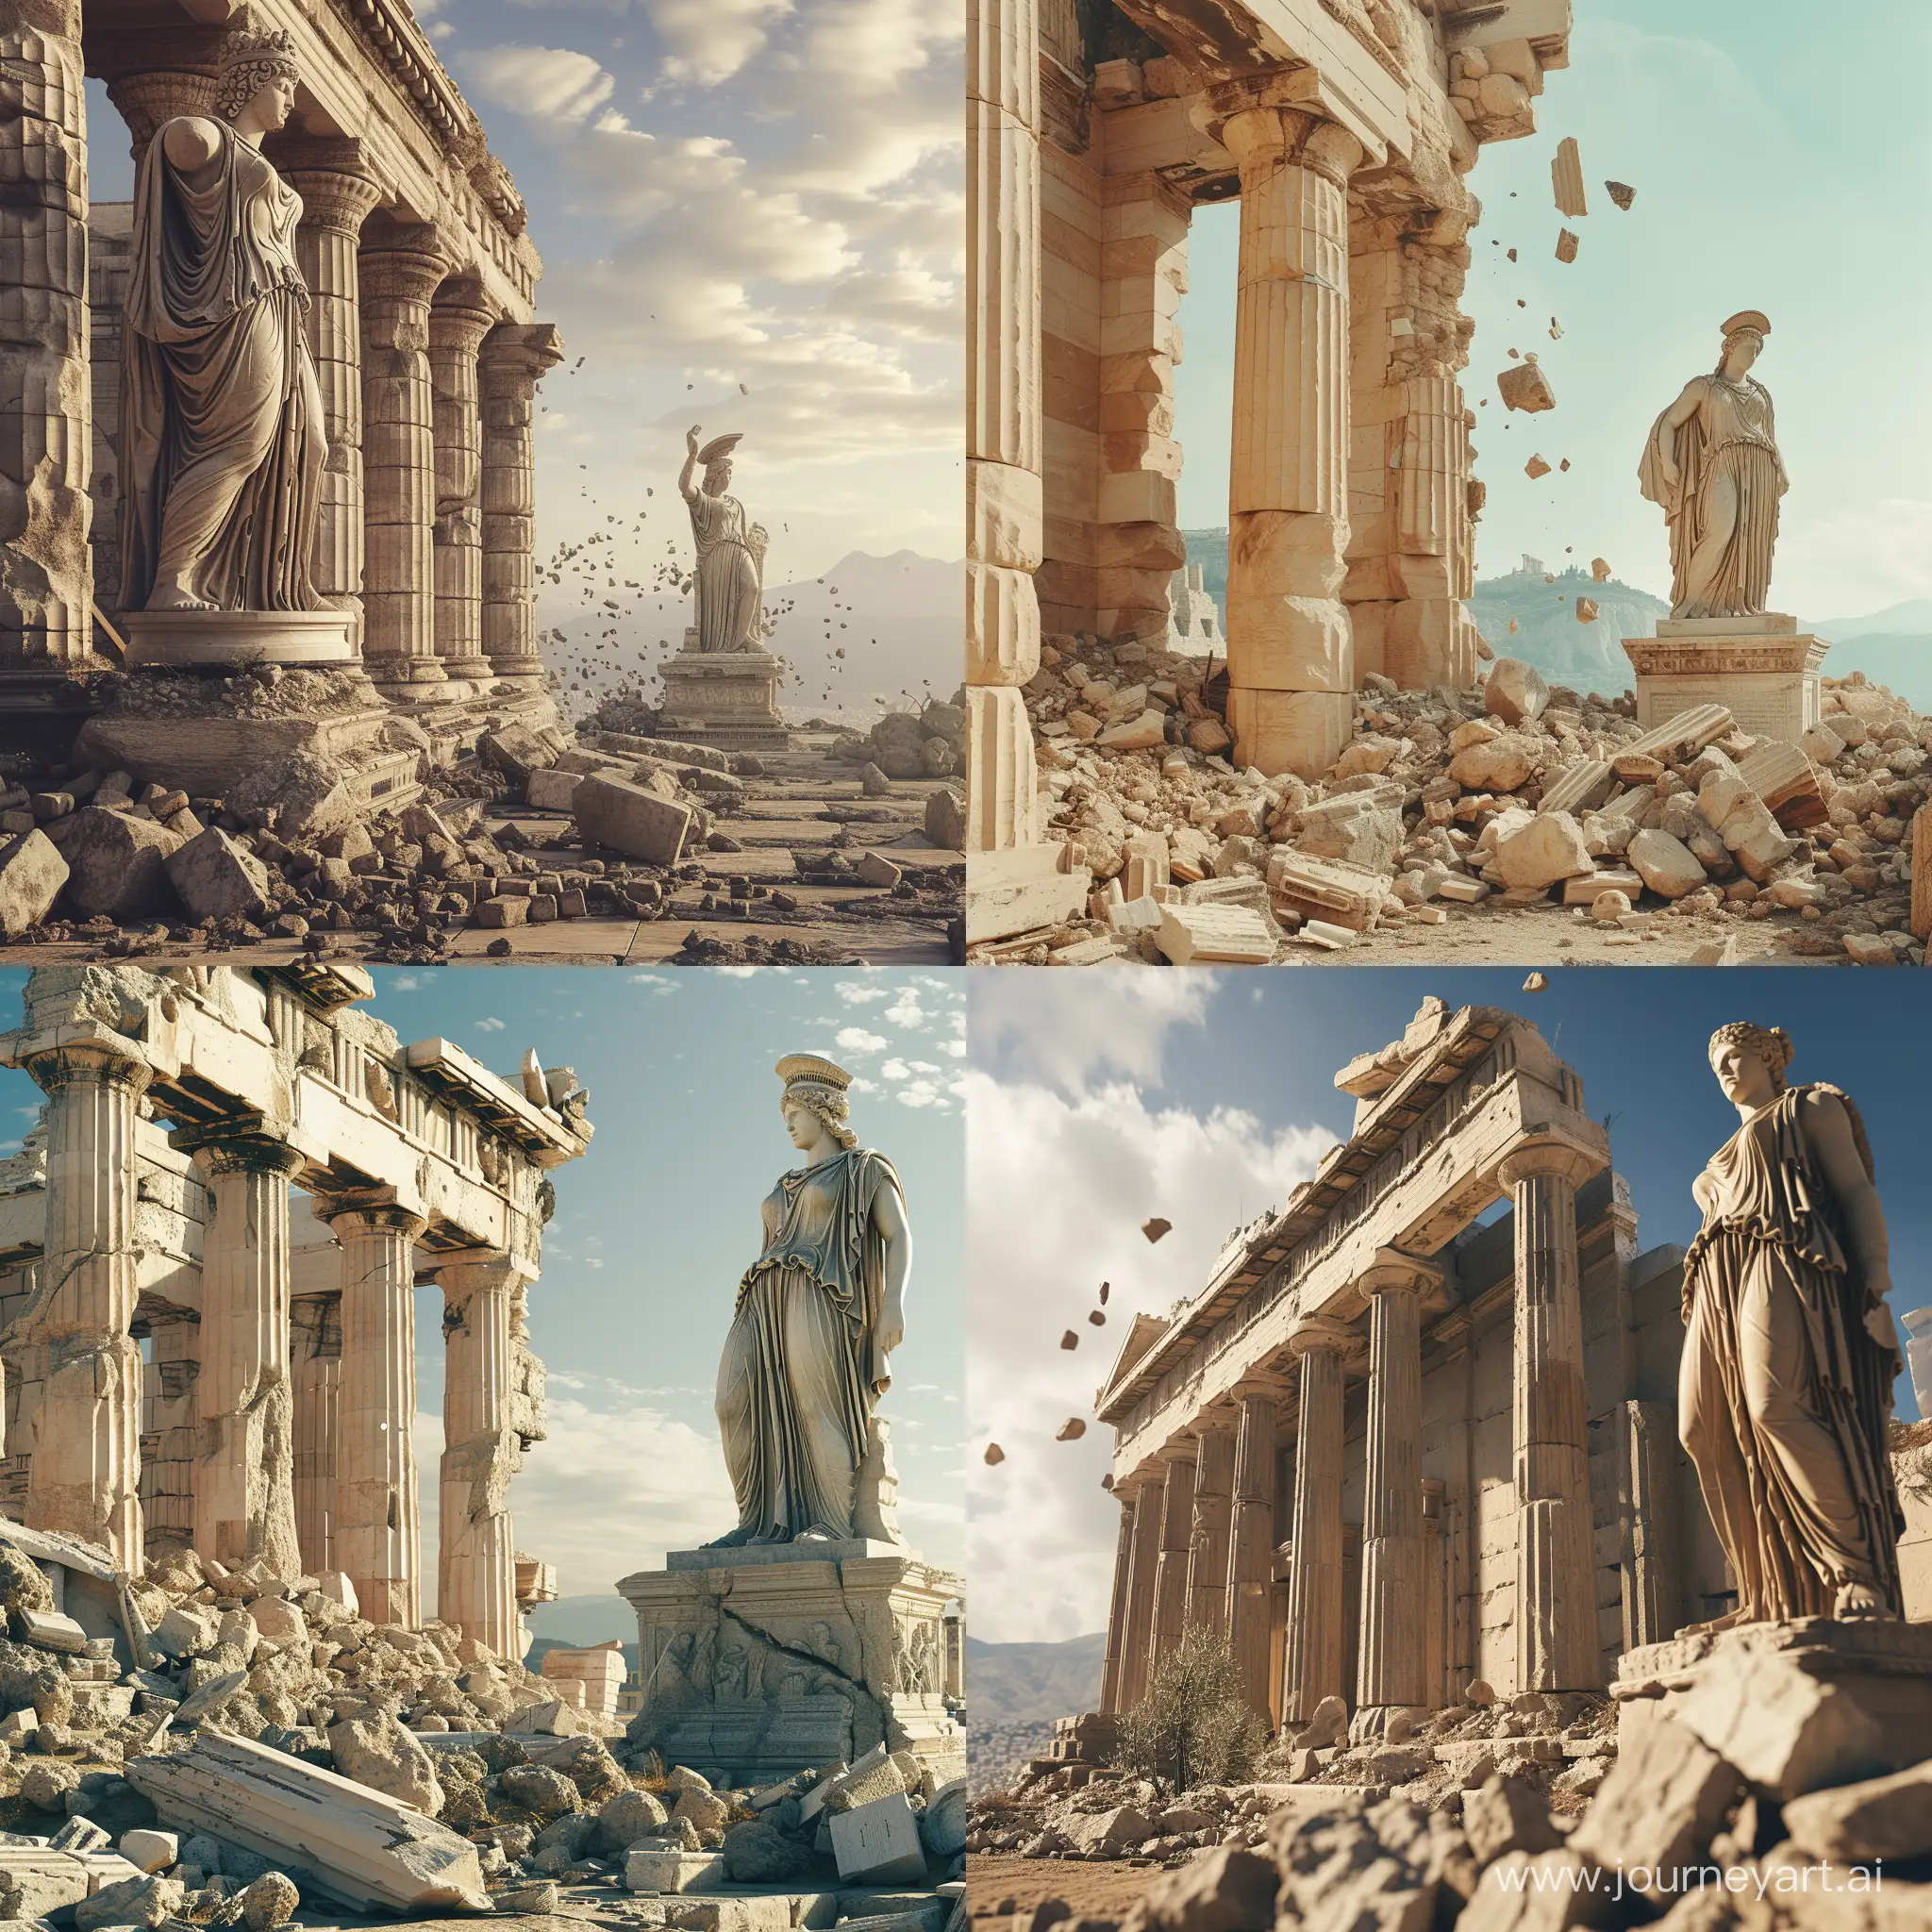 Partially-Destroyed-Ancient-Greek-Temple-with-Statue-of-Athena-Parthenos-in-4K-Resolution